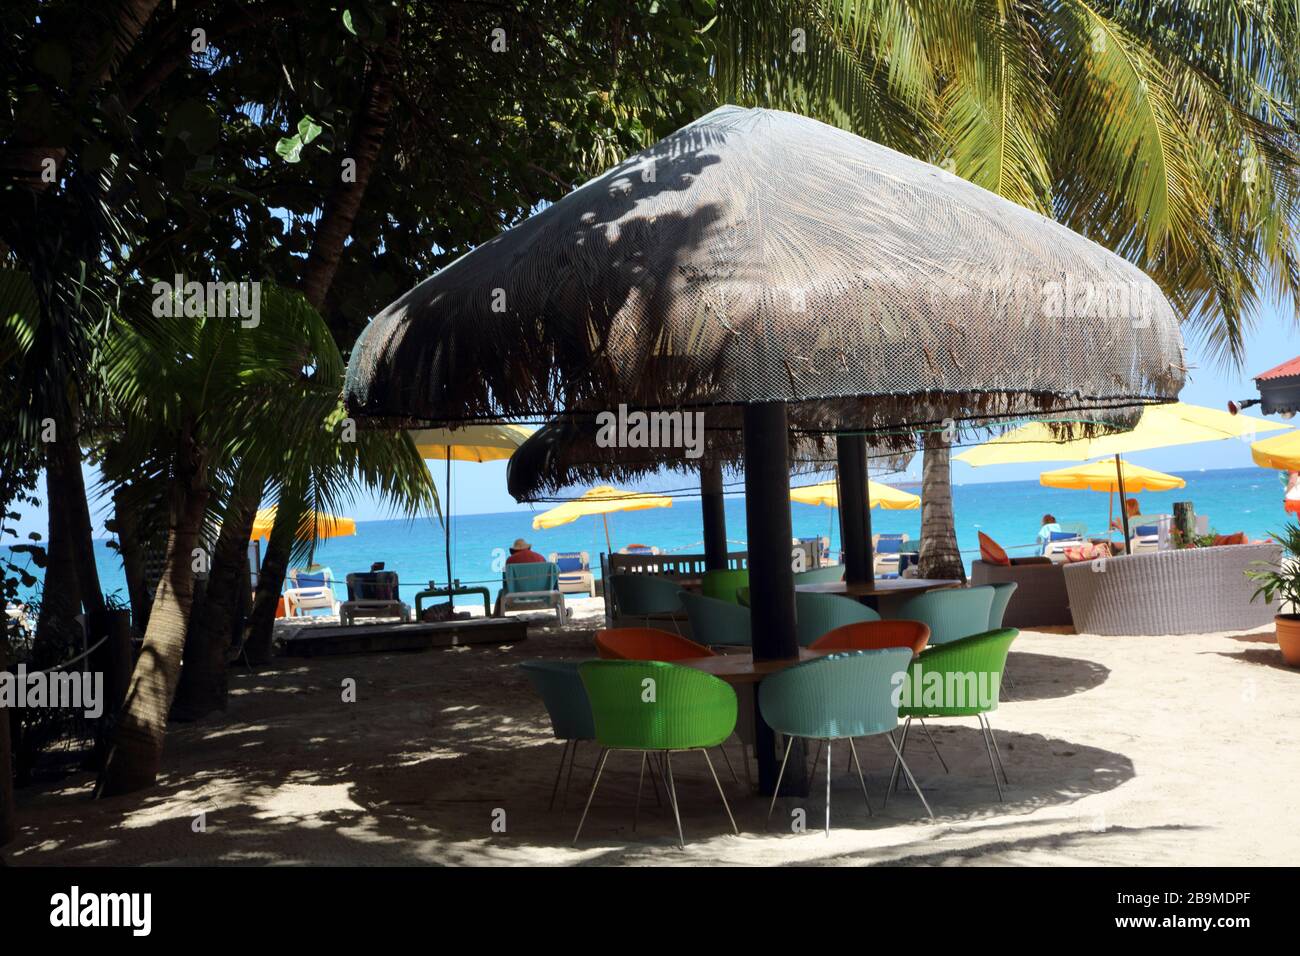 Grand Anse Beach Grenada Thatched Parasol with Netting Stock Photo - Alamy